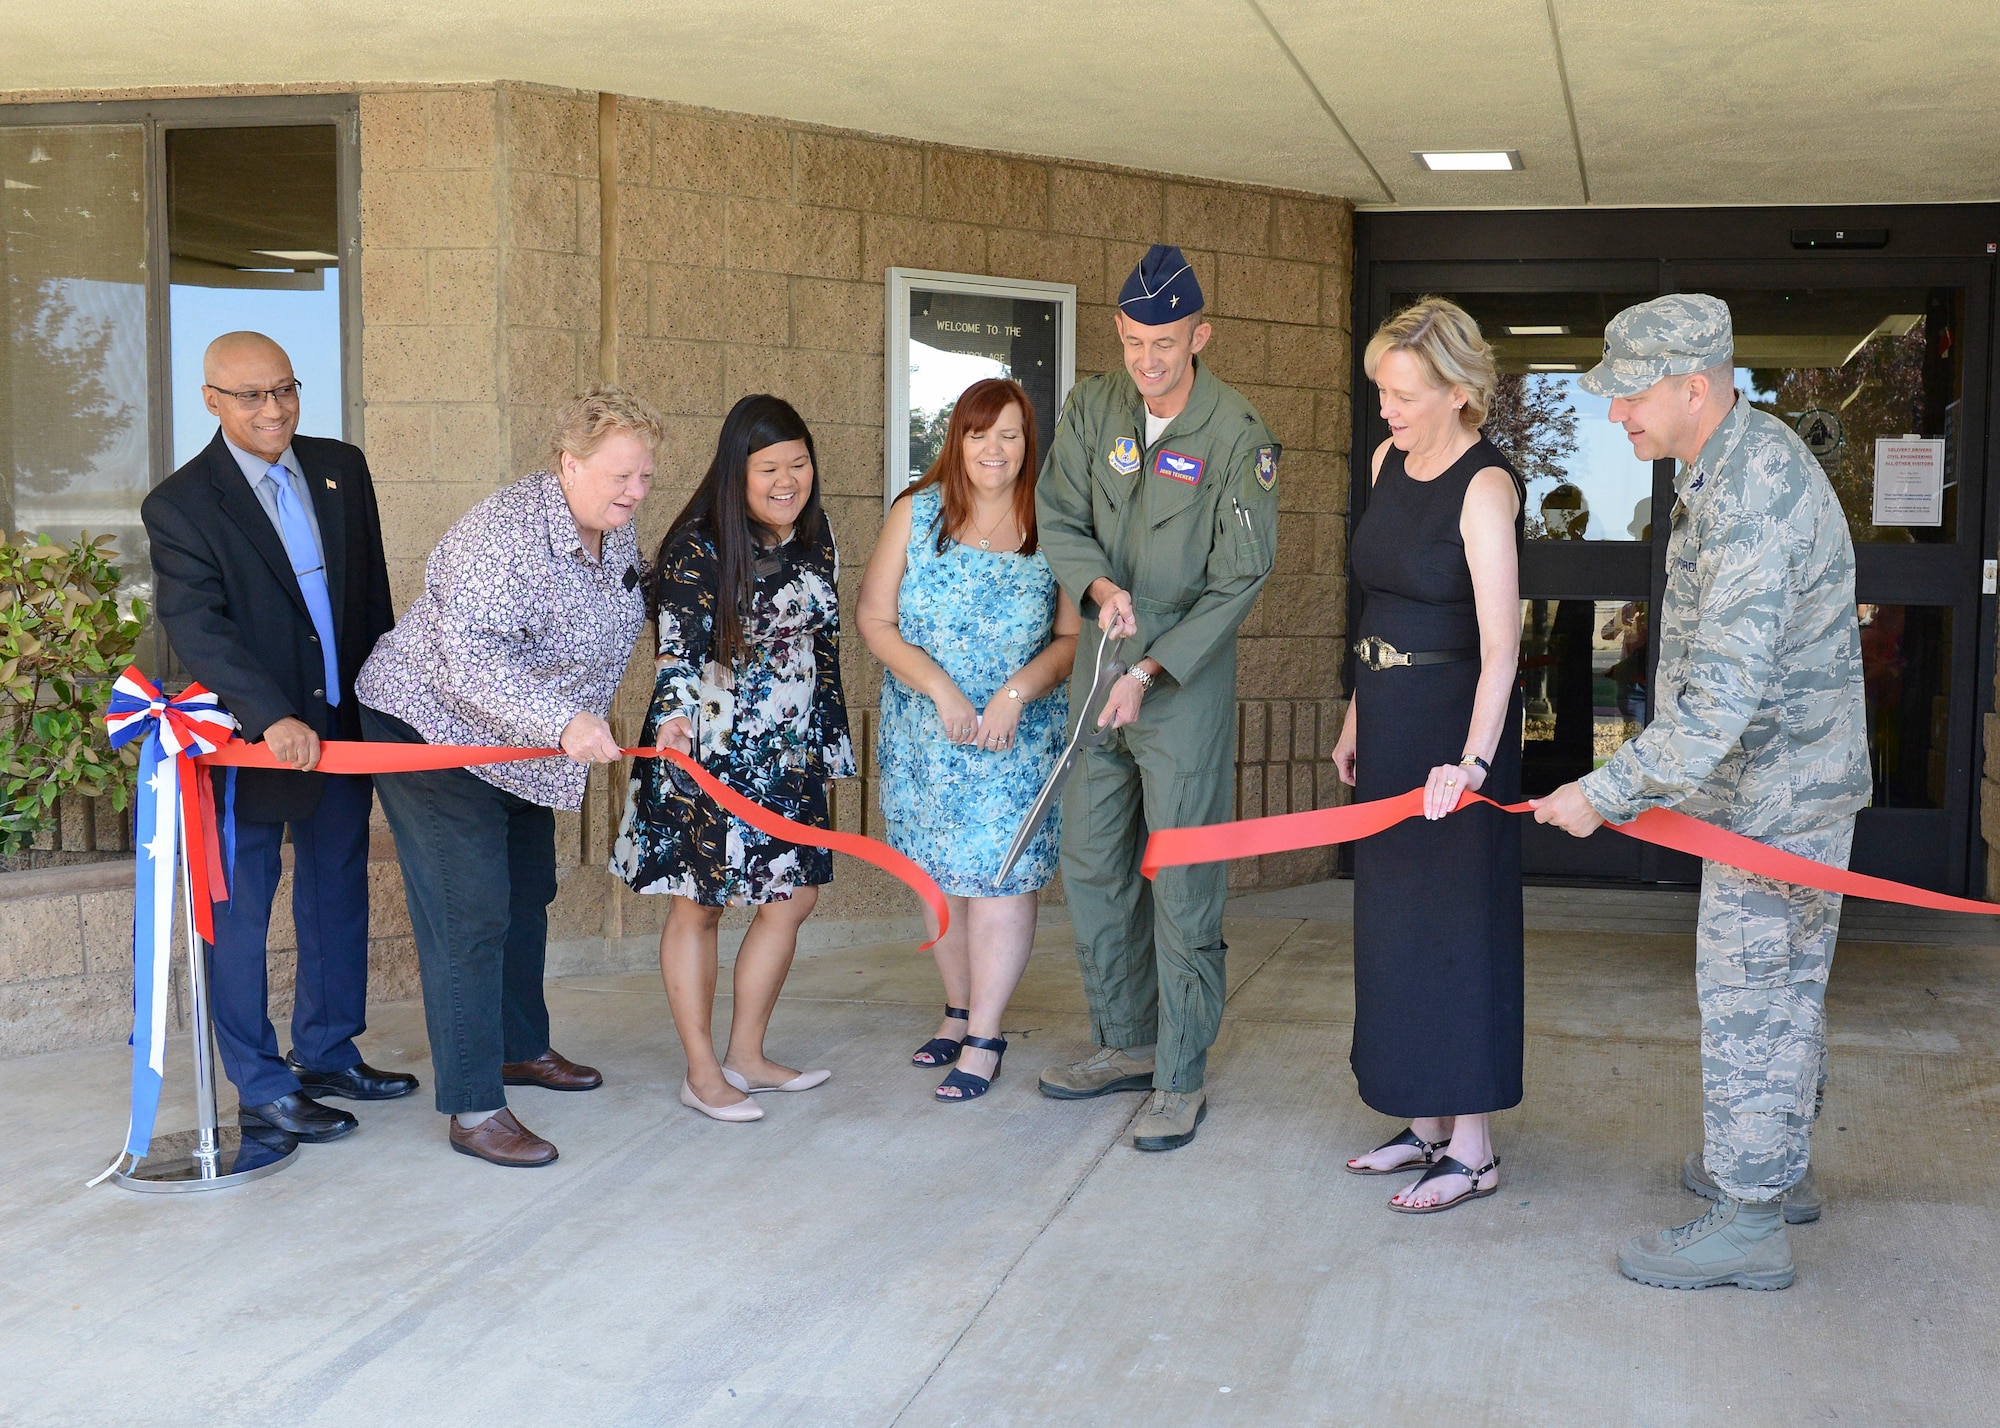 From left to right: Murray Westley, 412th Civil Engineer Squadron director; Gwyneth Bown, 412th Force Support Squadron Child and Youth Programs Flight chief; Colleen Evangelista-Weeks, 412th FSS; Kristen Burks, 412th FSS; Brig. Gen. E. John Teichert; 412th Test Wing commander; Janice Hollen, 412th FSS director; and Col. Jeffry Hollman, 412th Mission Support Group commander; cut the ceremonial red ribbon to officially reopen the School Age Annex Aug. 15. (U.S. Air Force photo by Kenji Thuloweit)